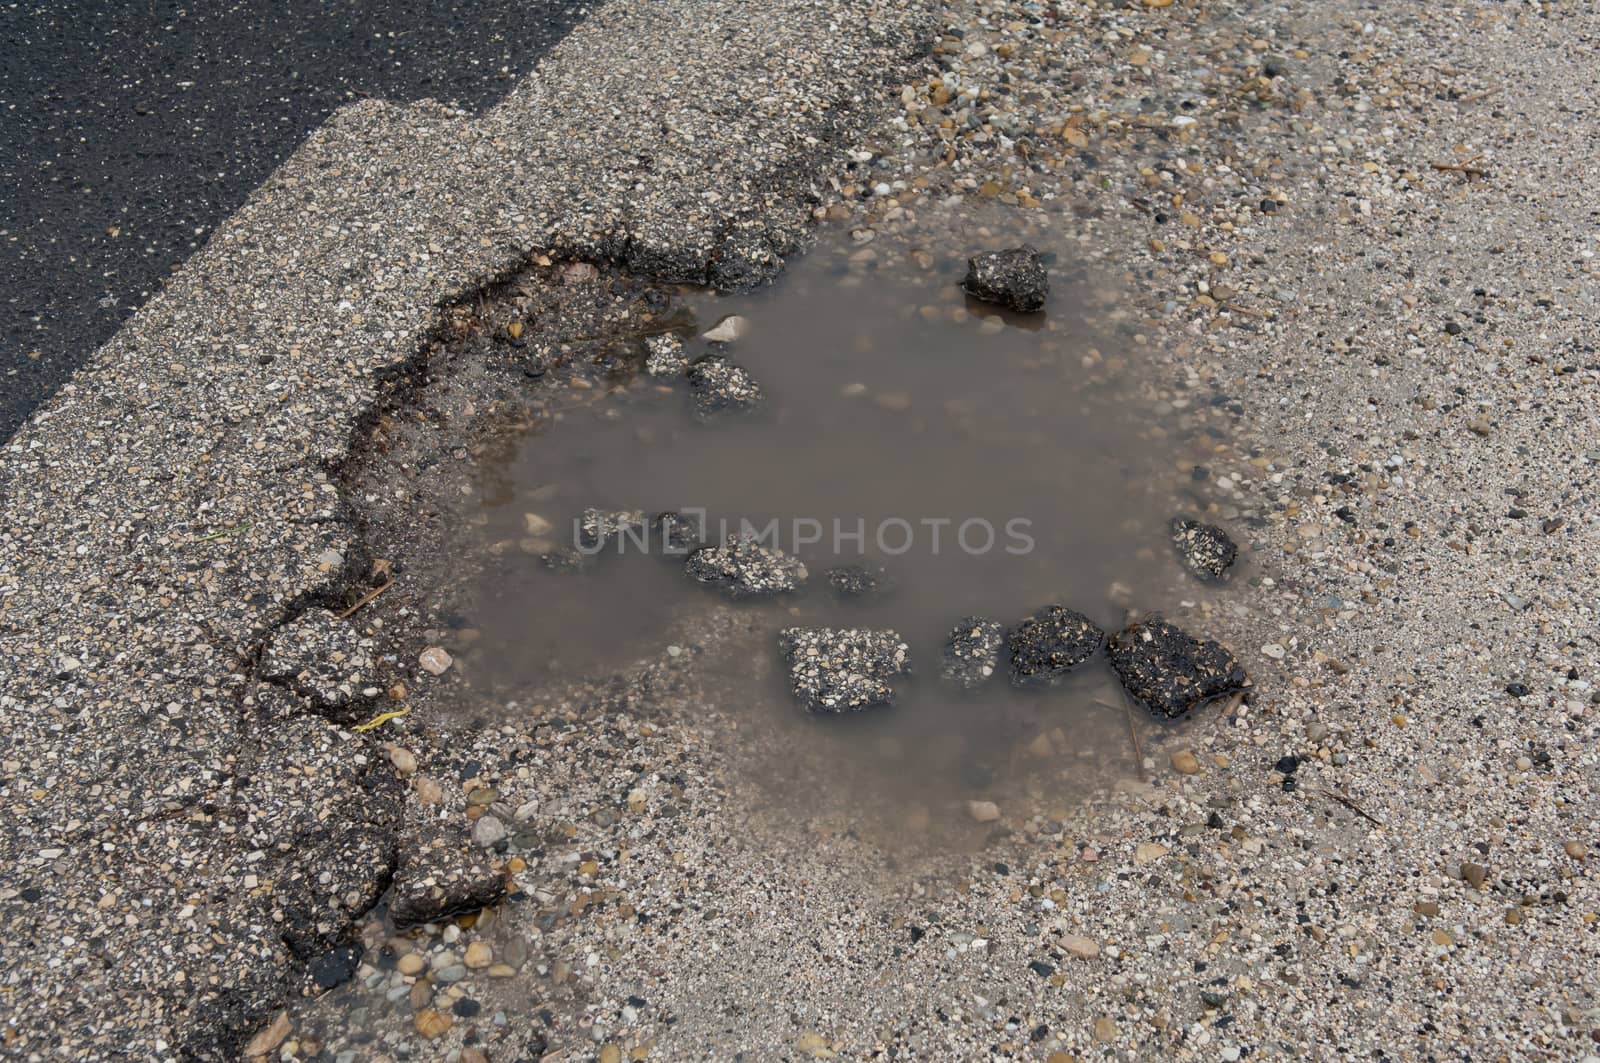 Asphalt road with pothole filled with water and asphalt pieces